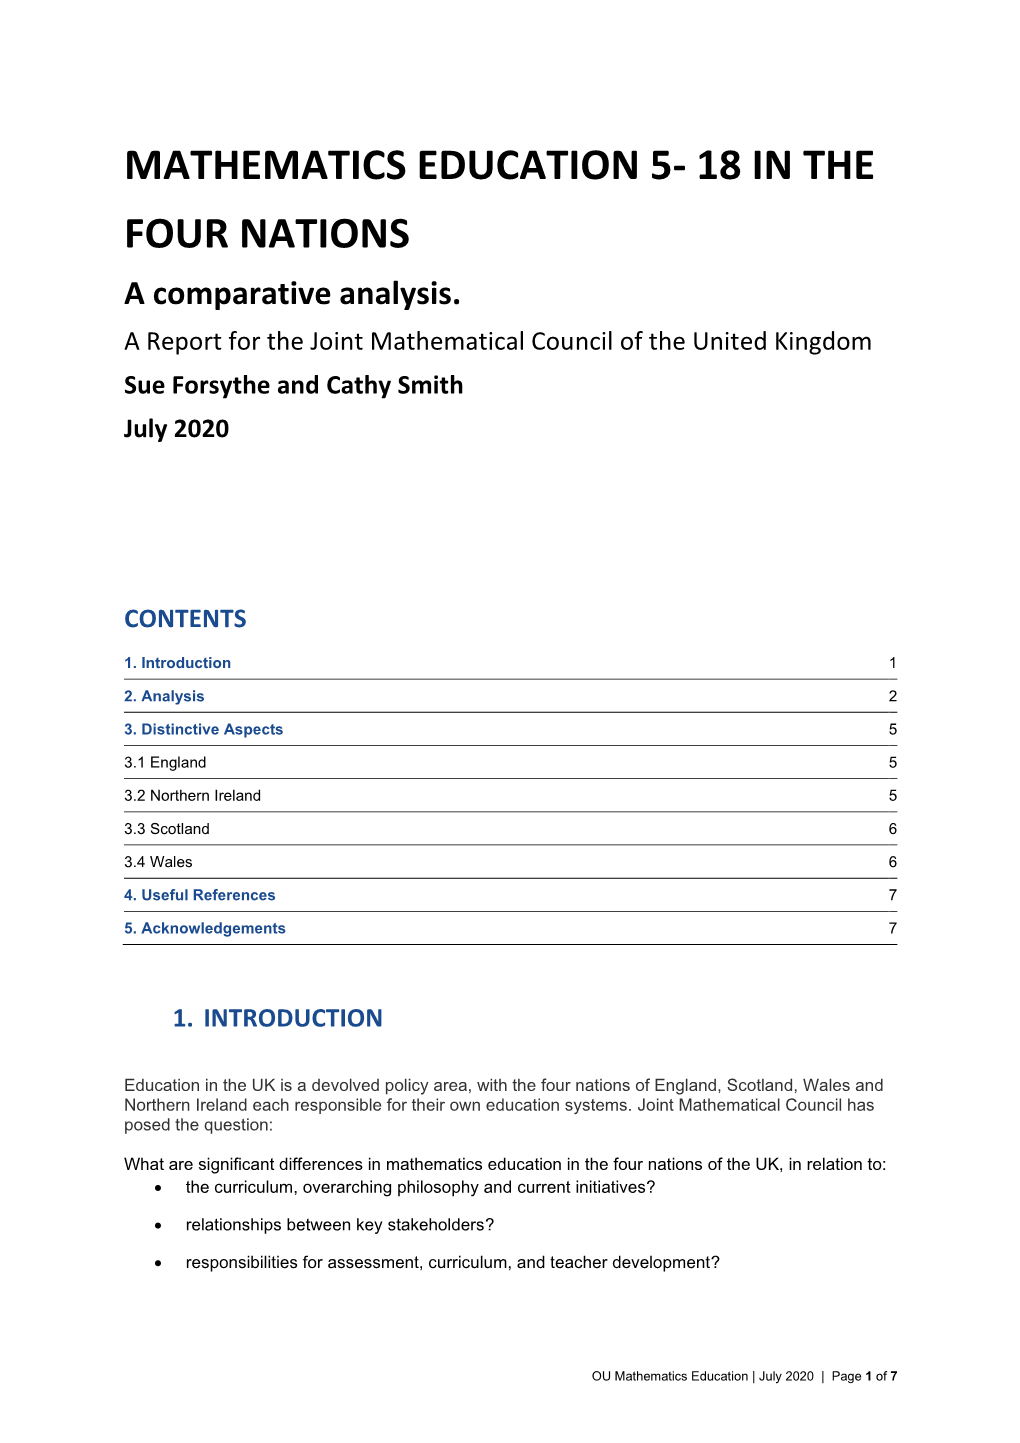 MATHEMATICS EDUCATION 5- 18 in the FOUR NATIONS a Comparative Analysis